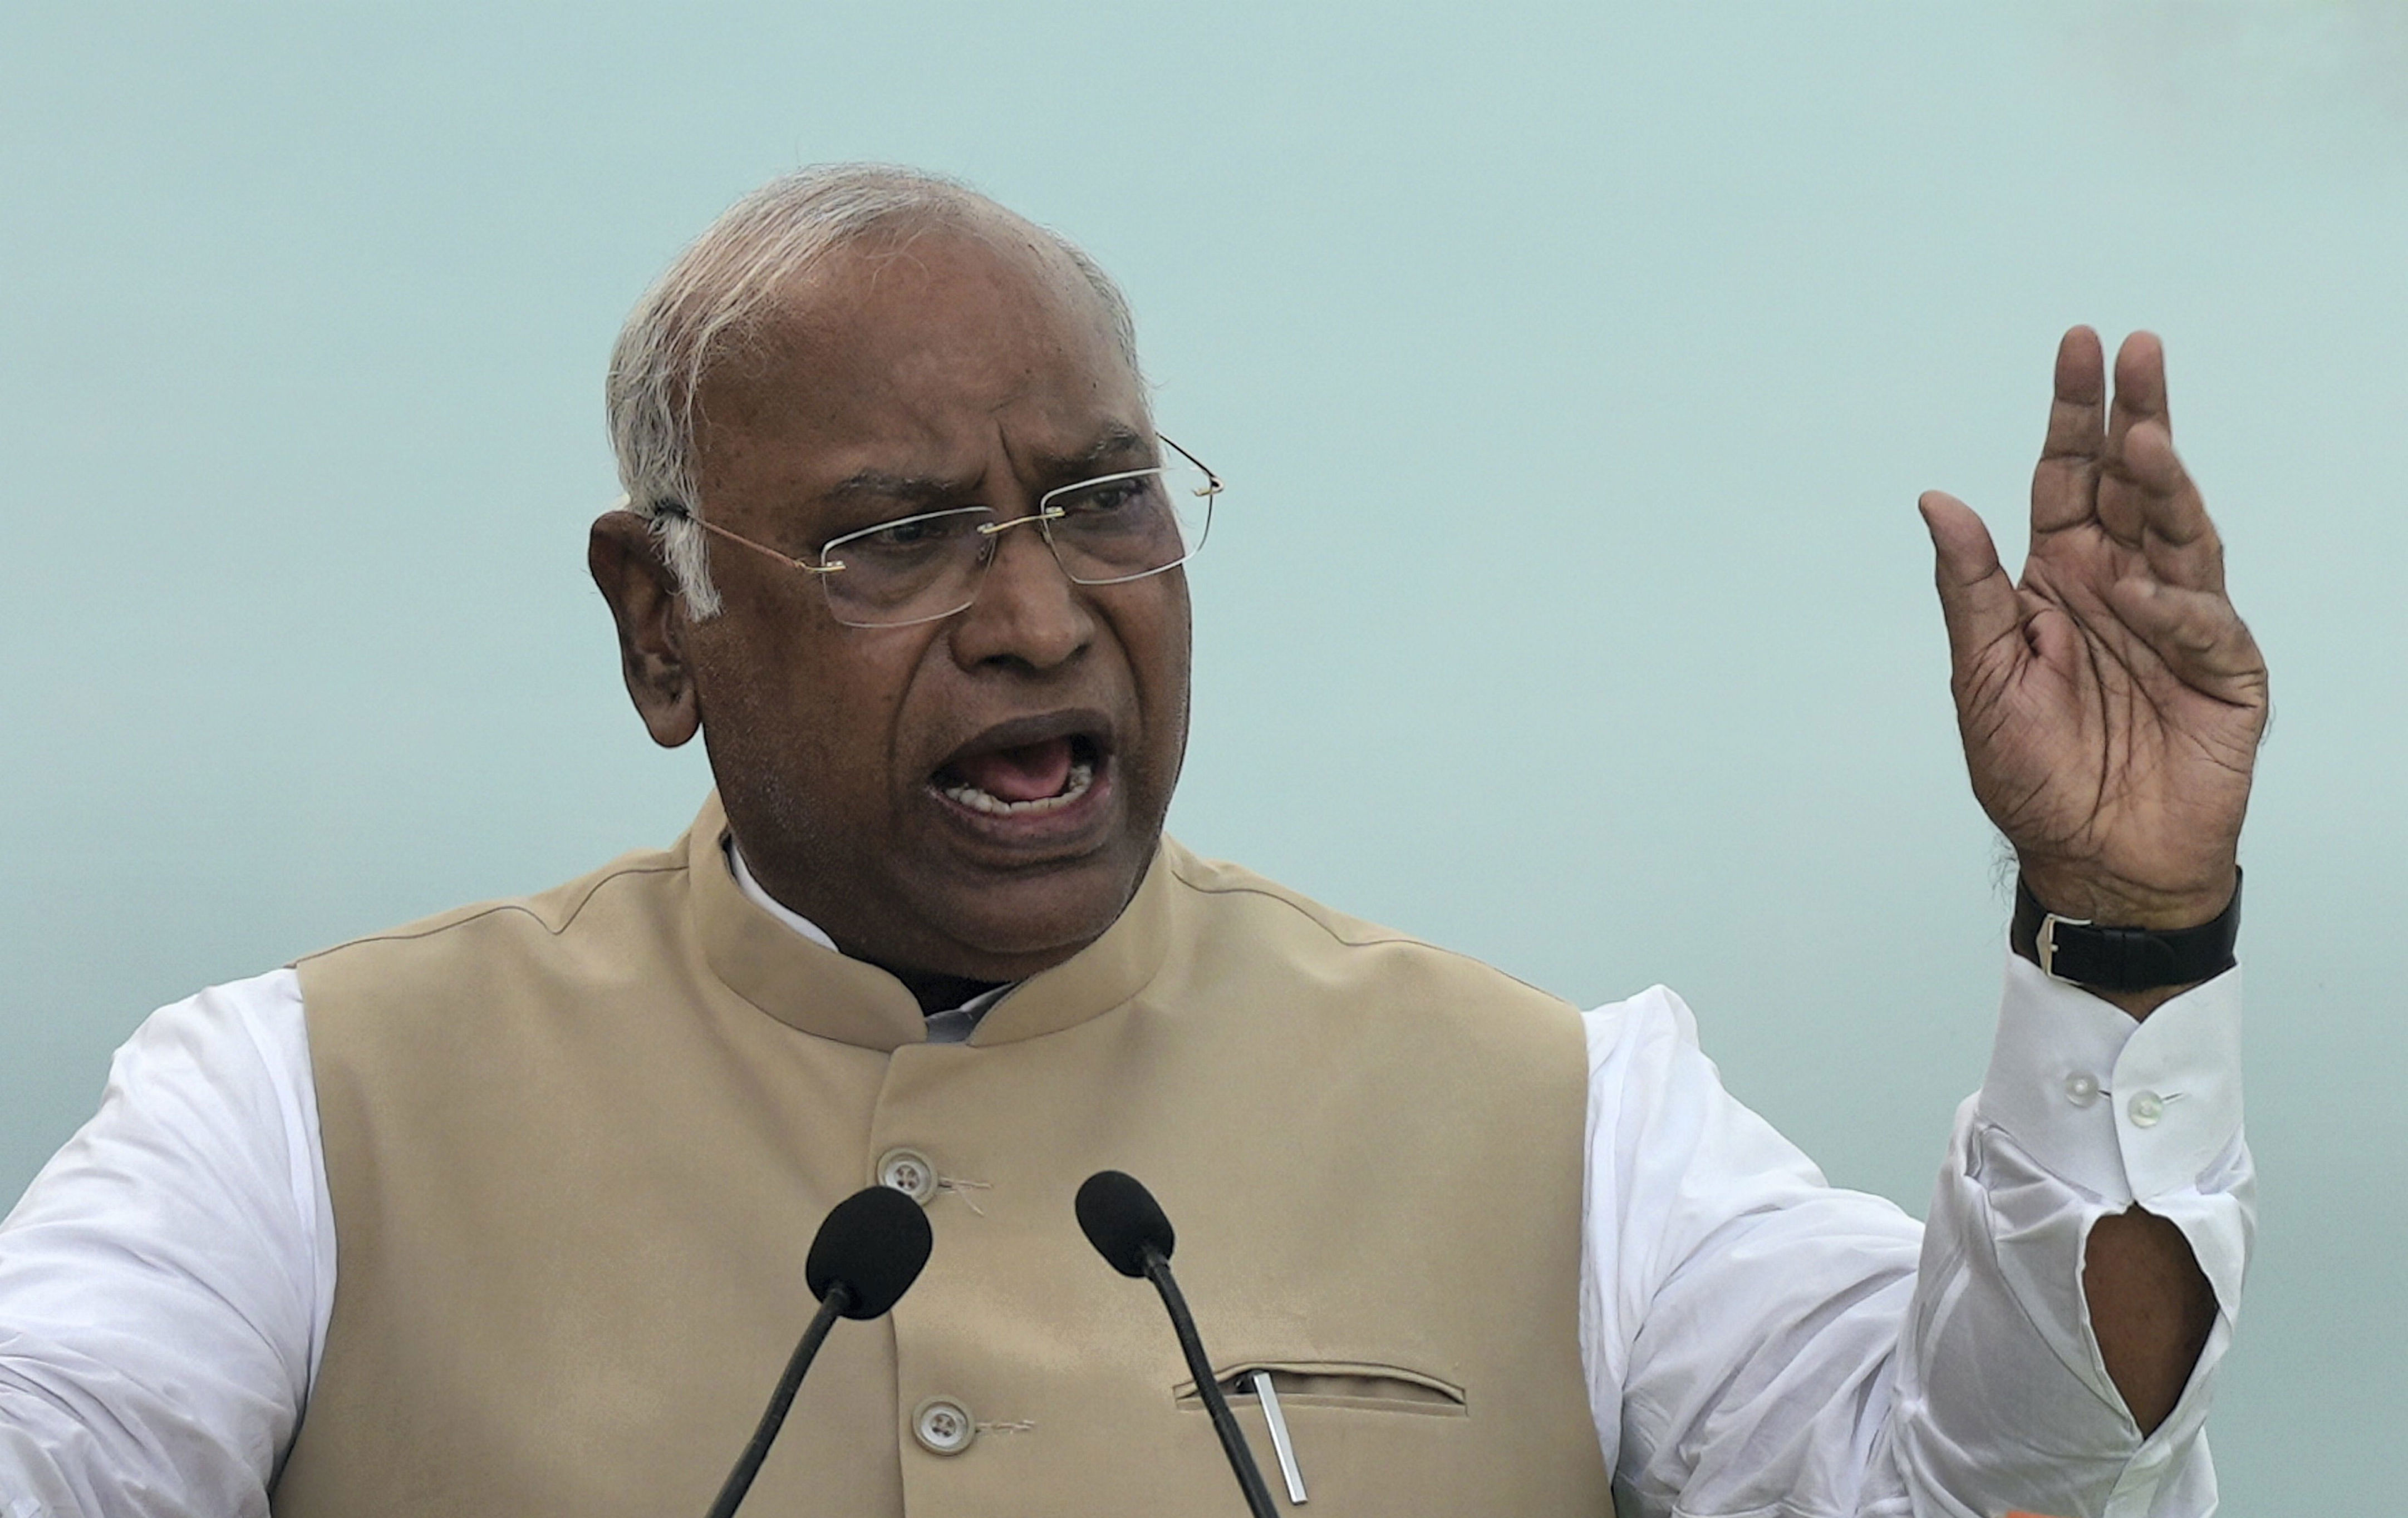 North East parties go with Central govt trend, says Kharge on polls